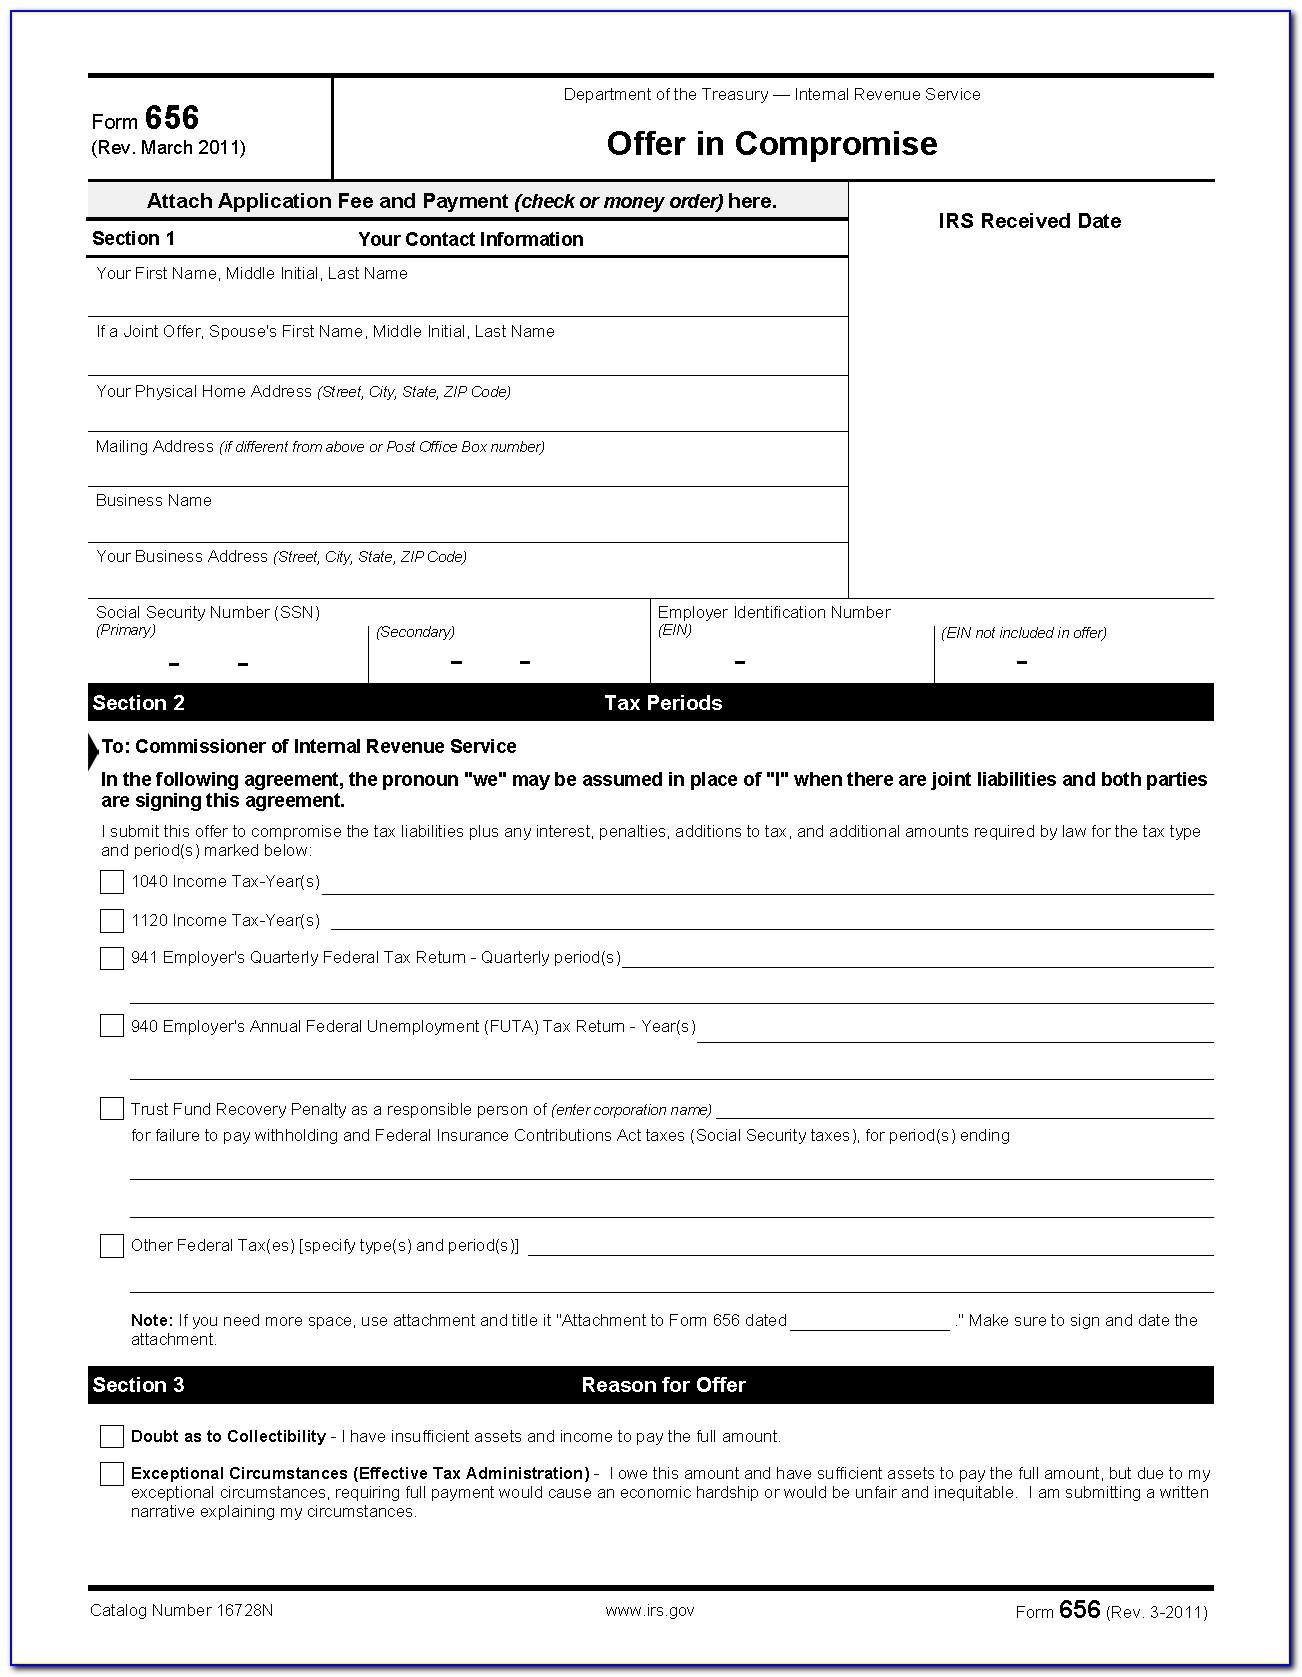 Irs Offer Compromise Form 656 L